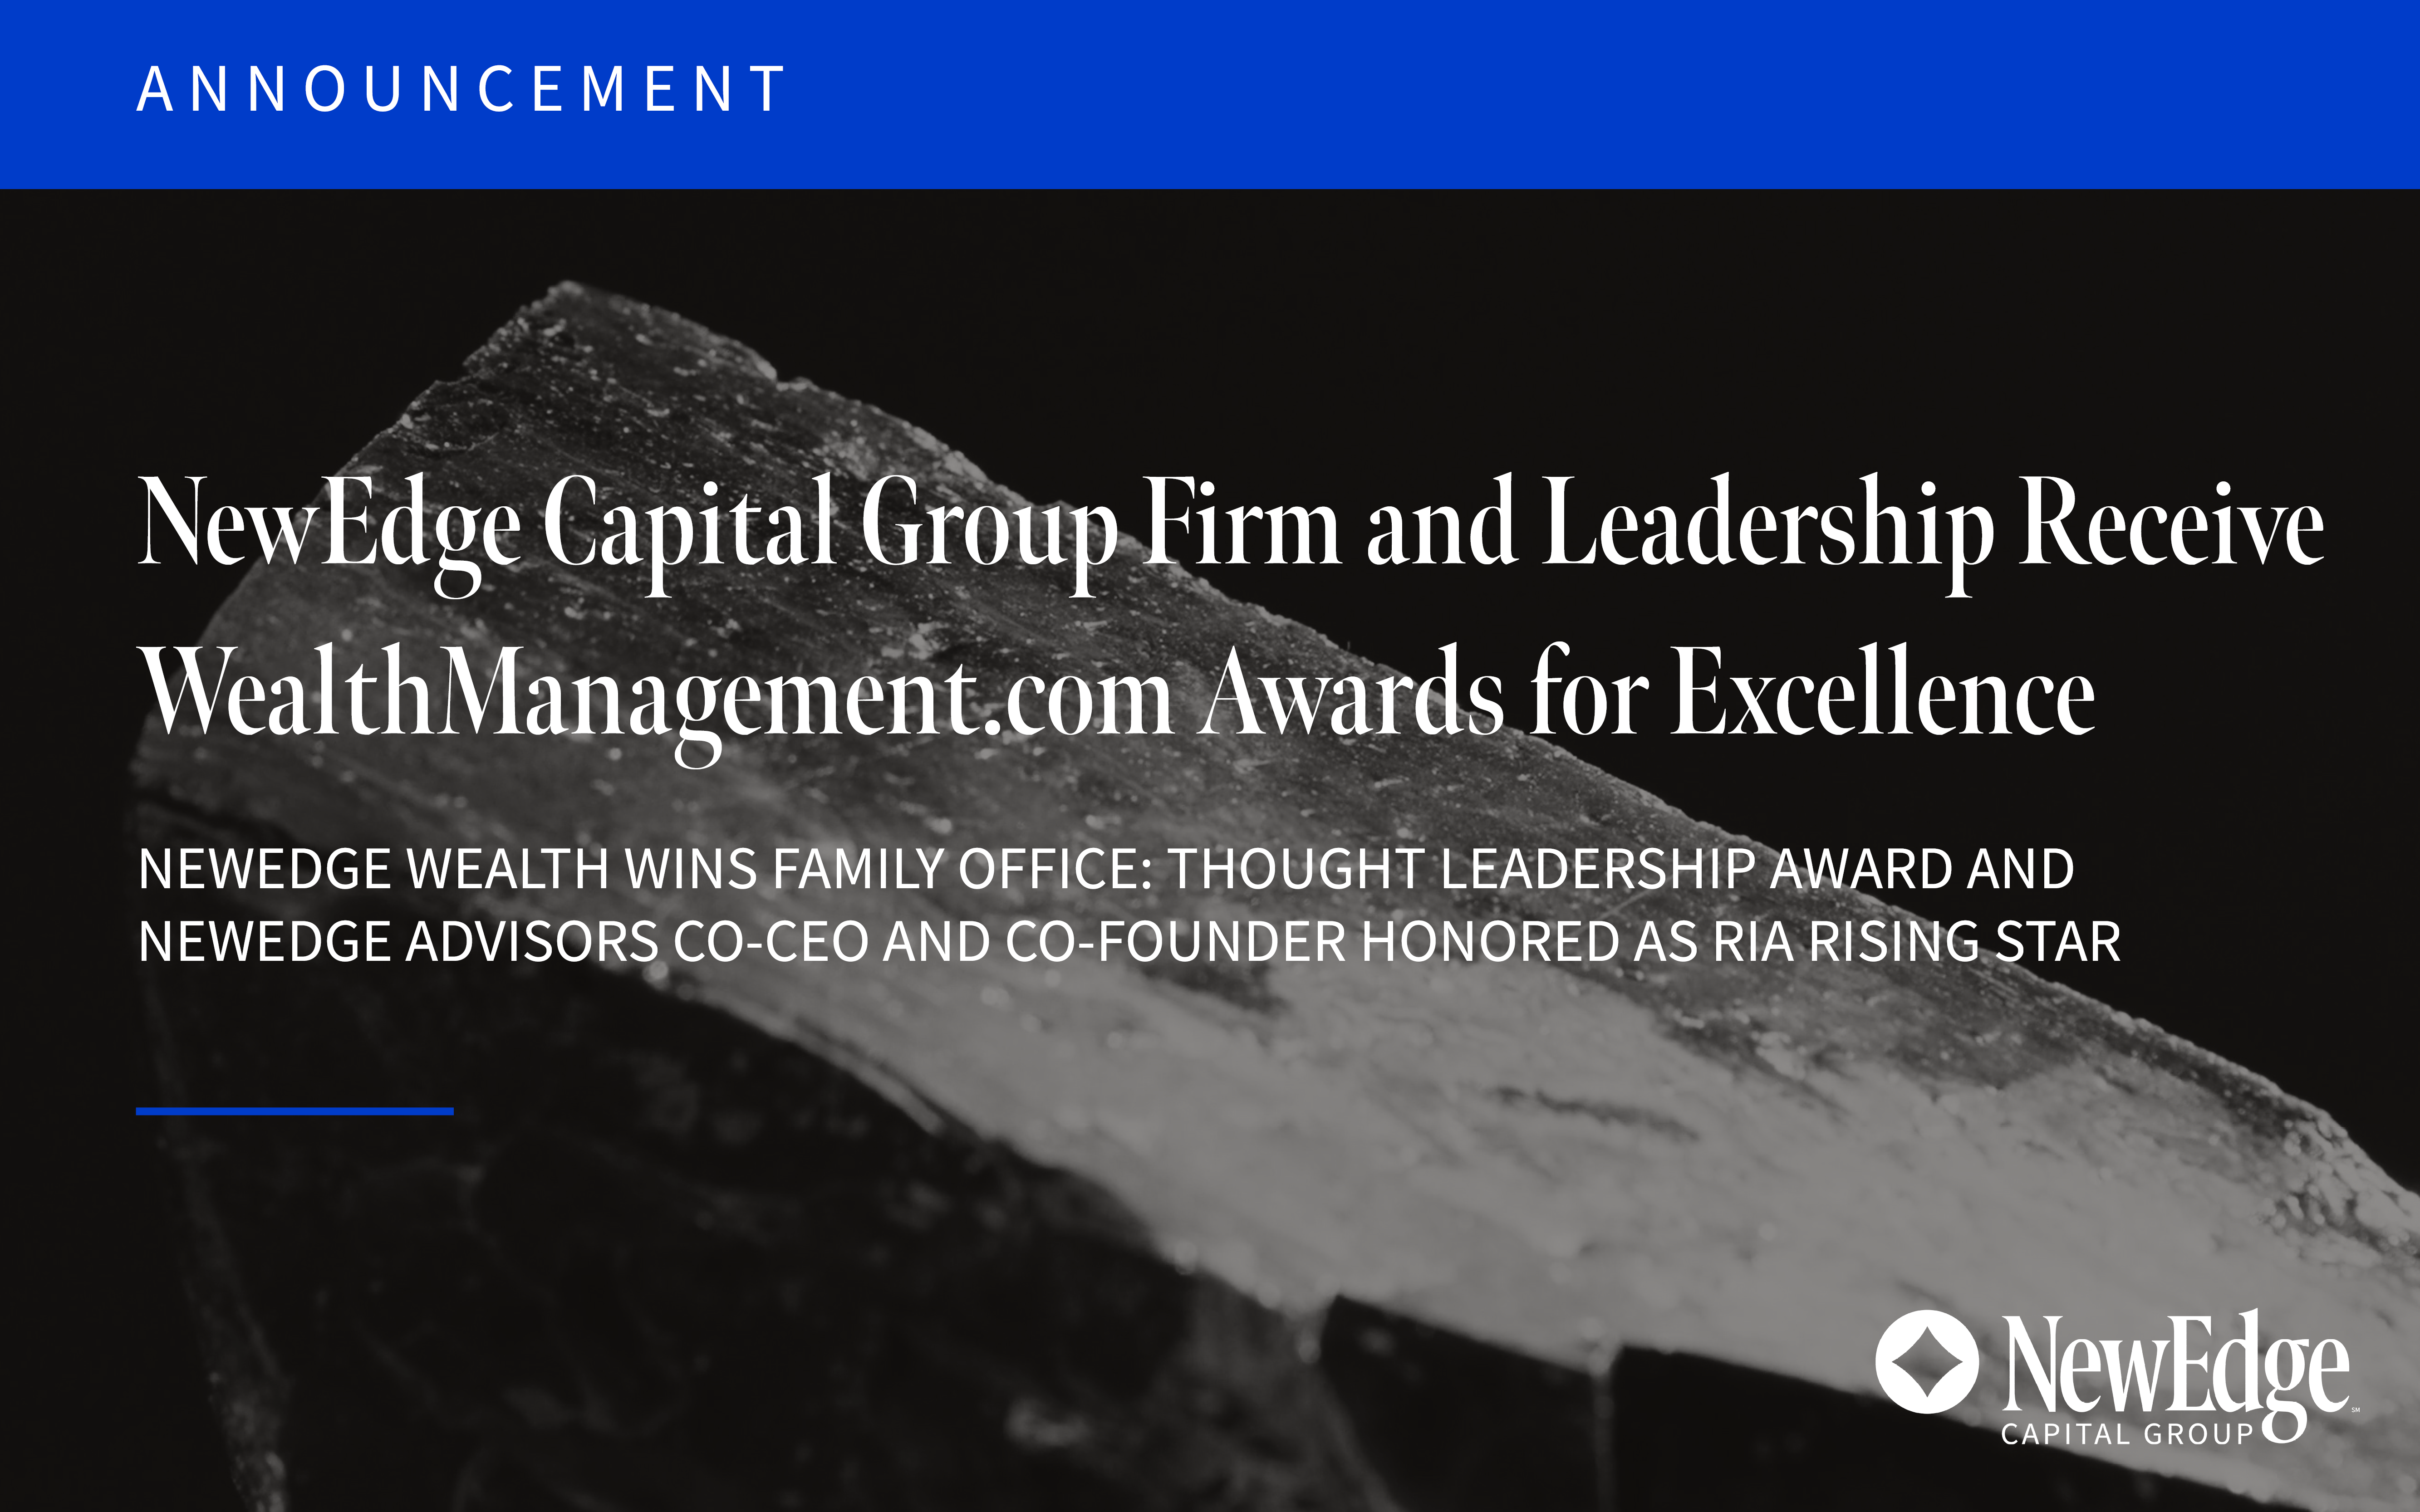 NewEdge Capital Group Firm and Leadership Receive WealthManagement.com Awards for Excellence